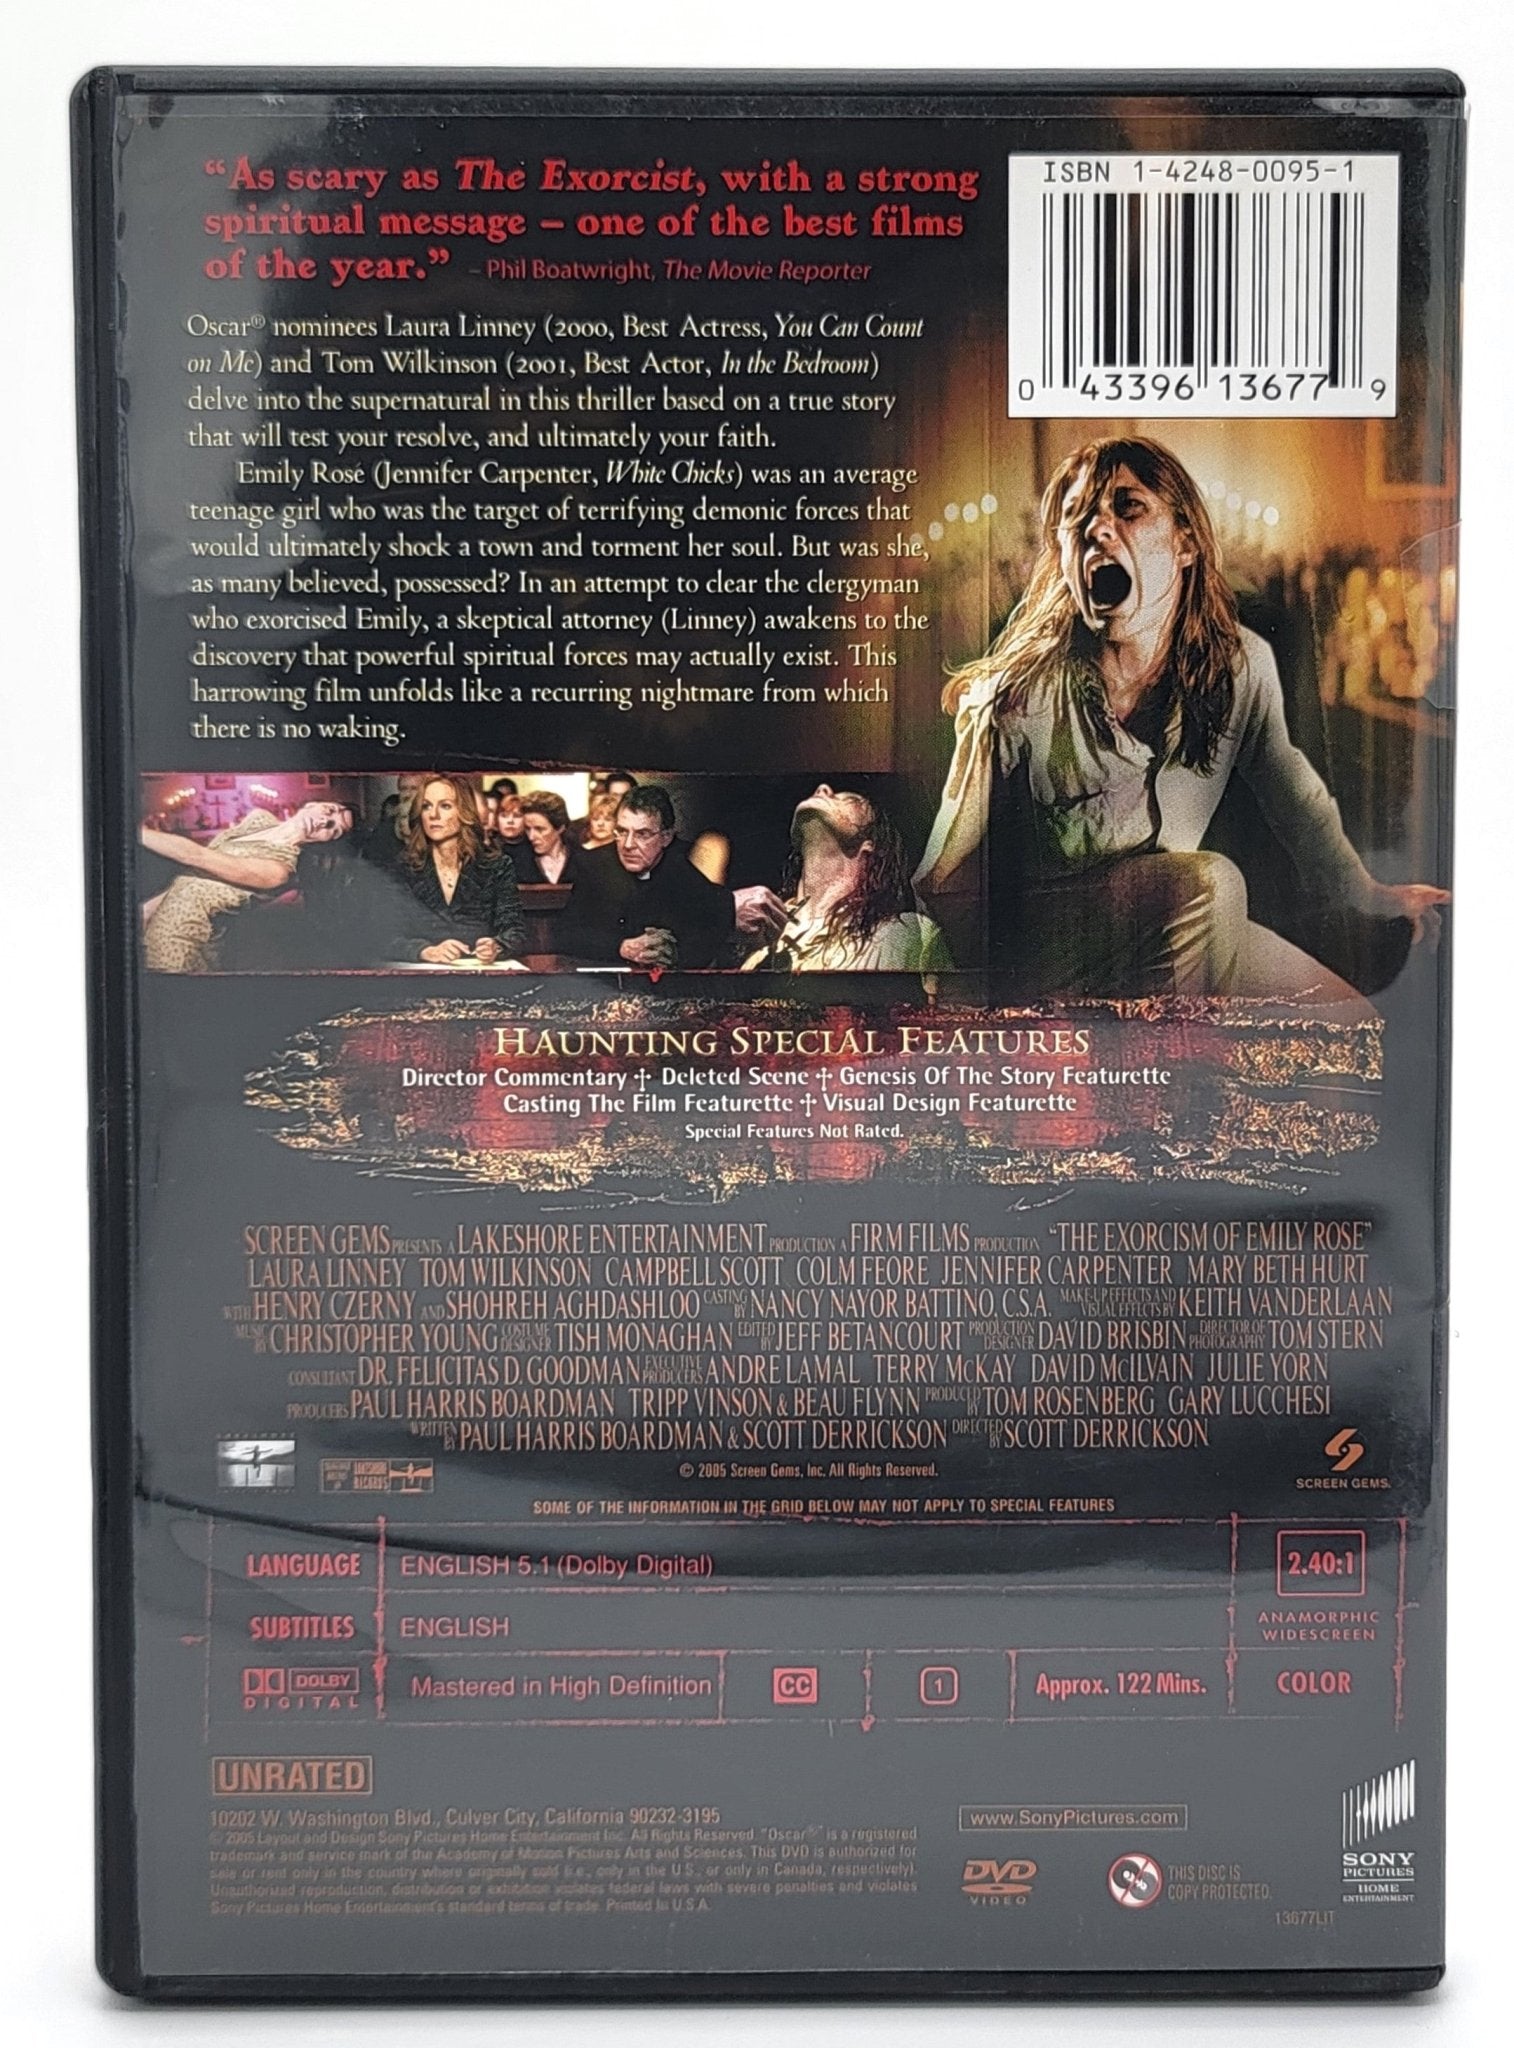 Sony Pictures Home Entertainment - The Exorcism of Emily Rose | DVD | Special Edition Widescreen Unrated Version - DVD - Steady Bunny Shop